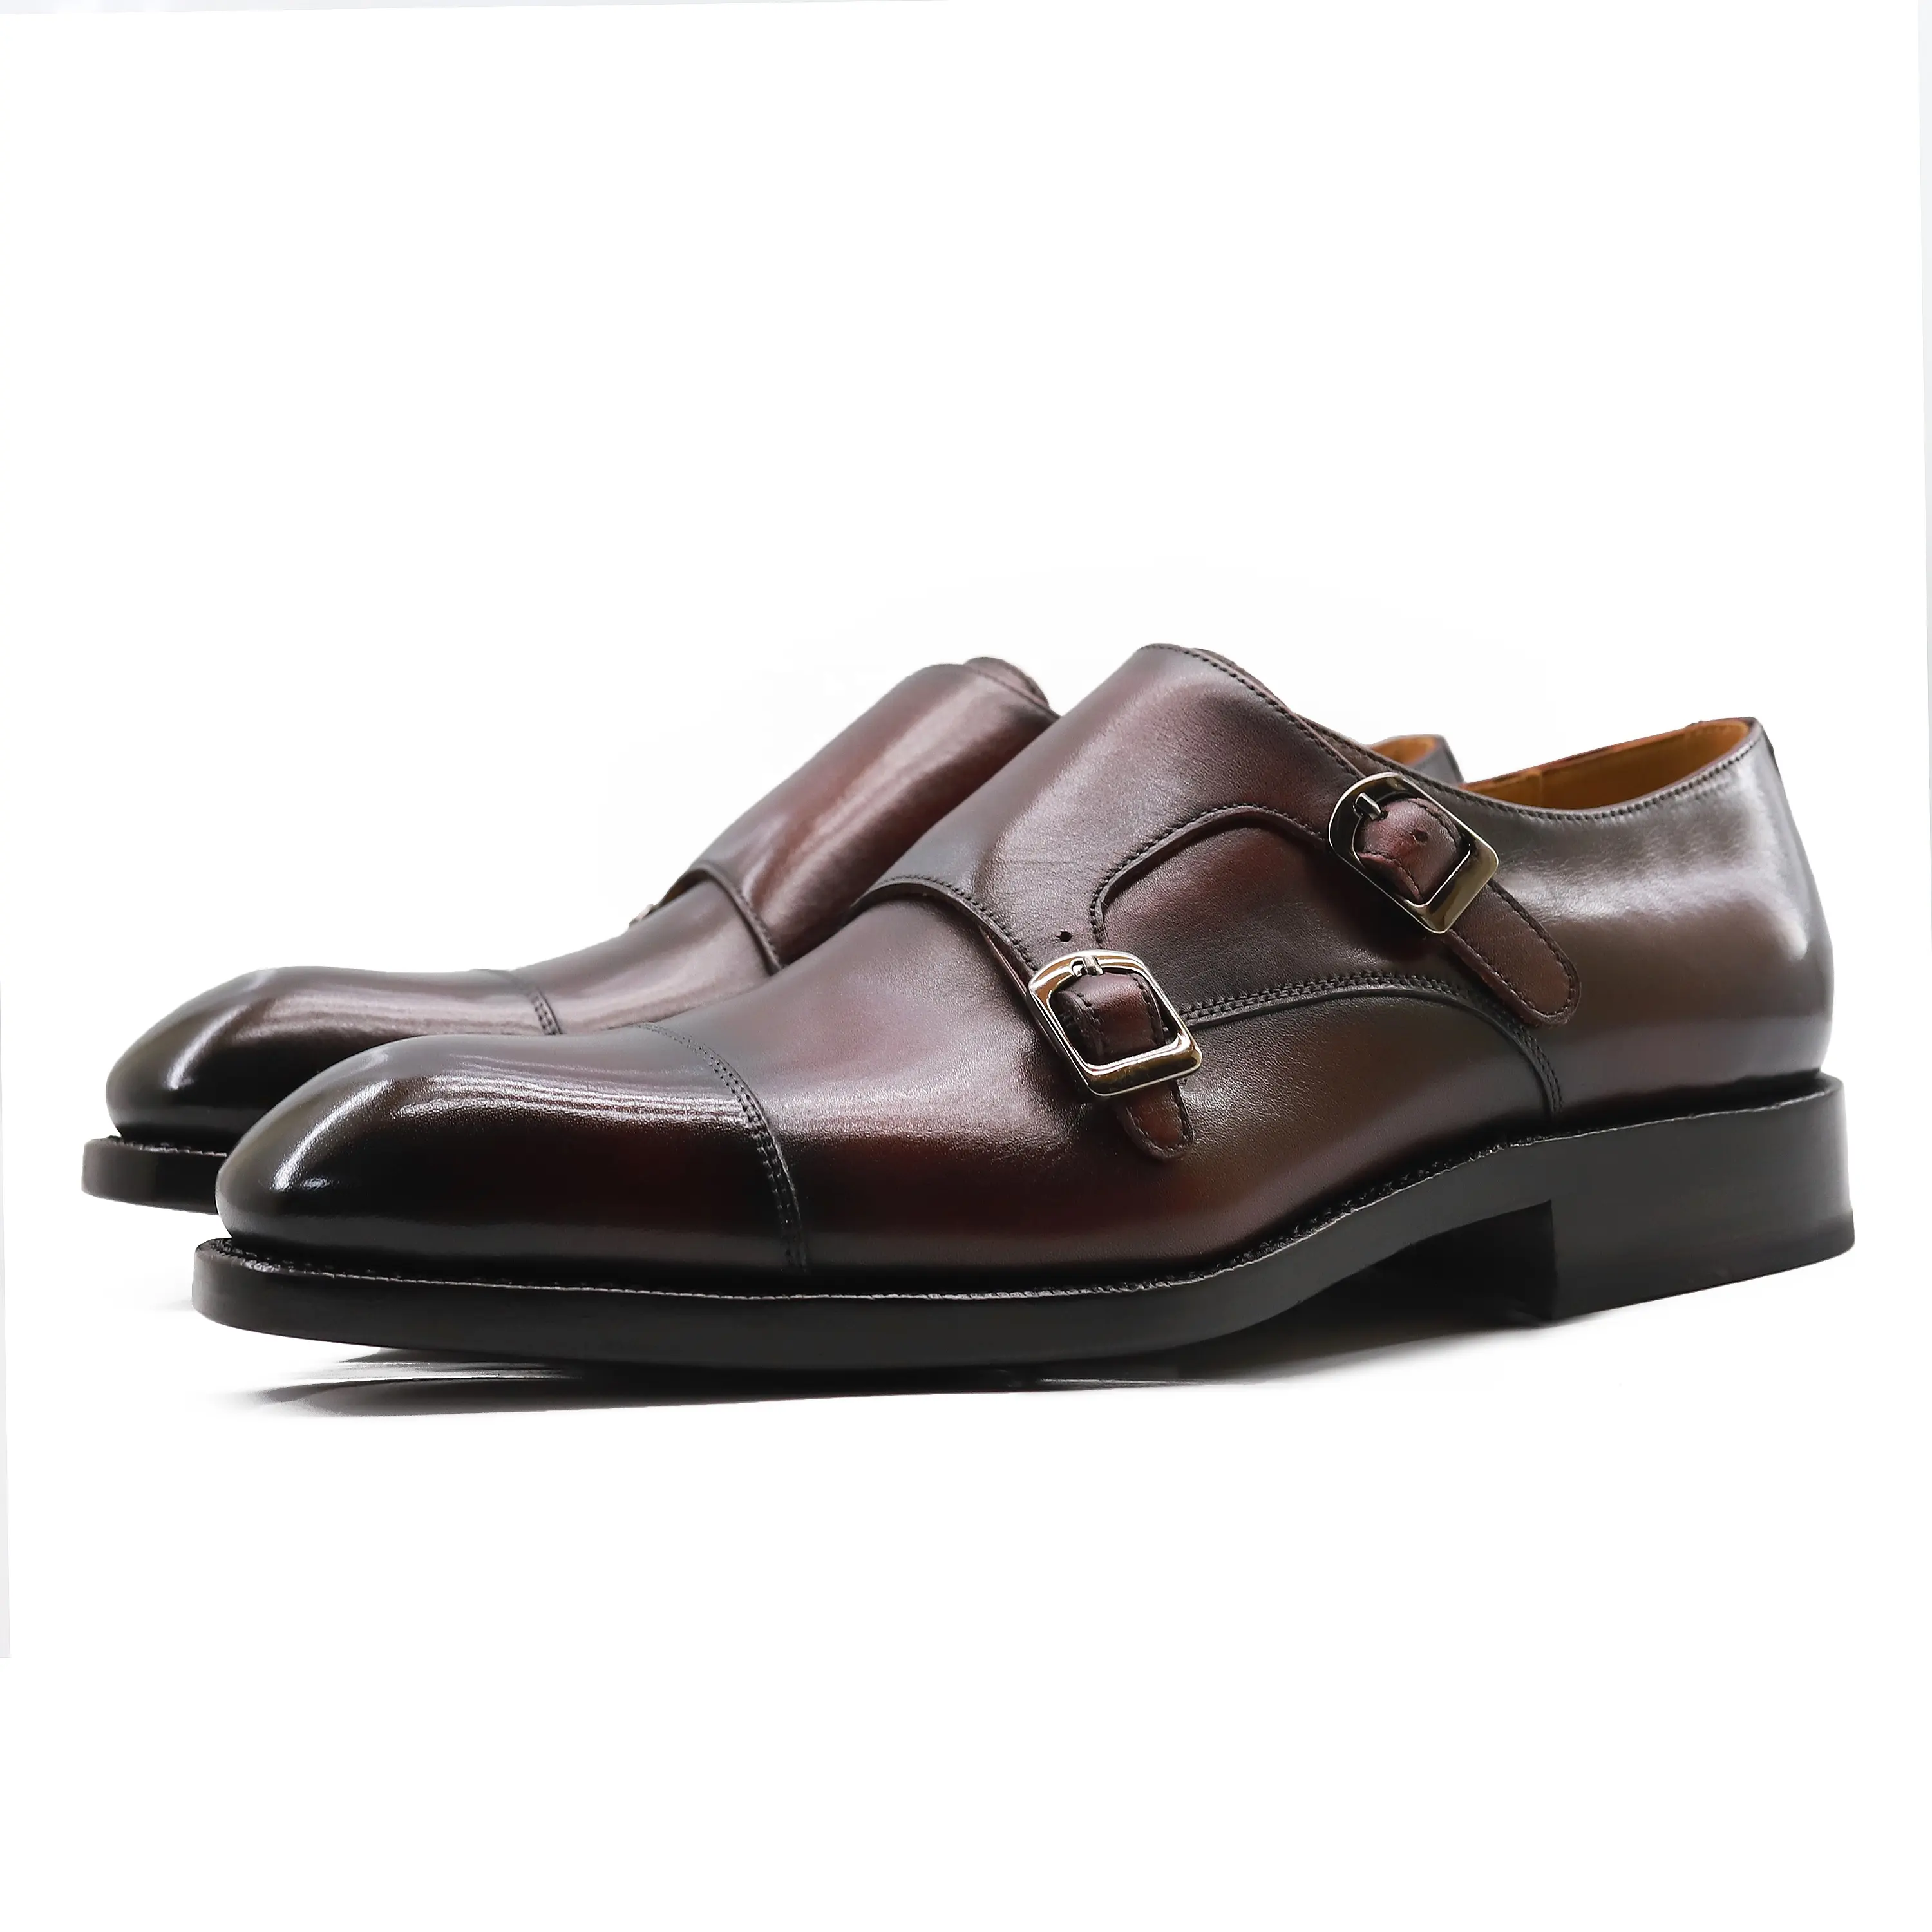 Goodyear Office Shoes Men 2021 New Arrival High Quality Cow Leather Handmade Shoes Dress Red Bottom Shoes Men